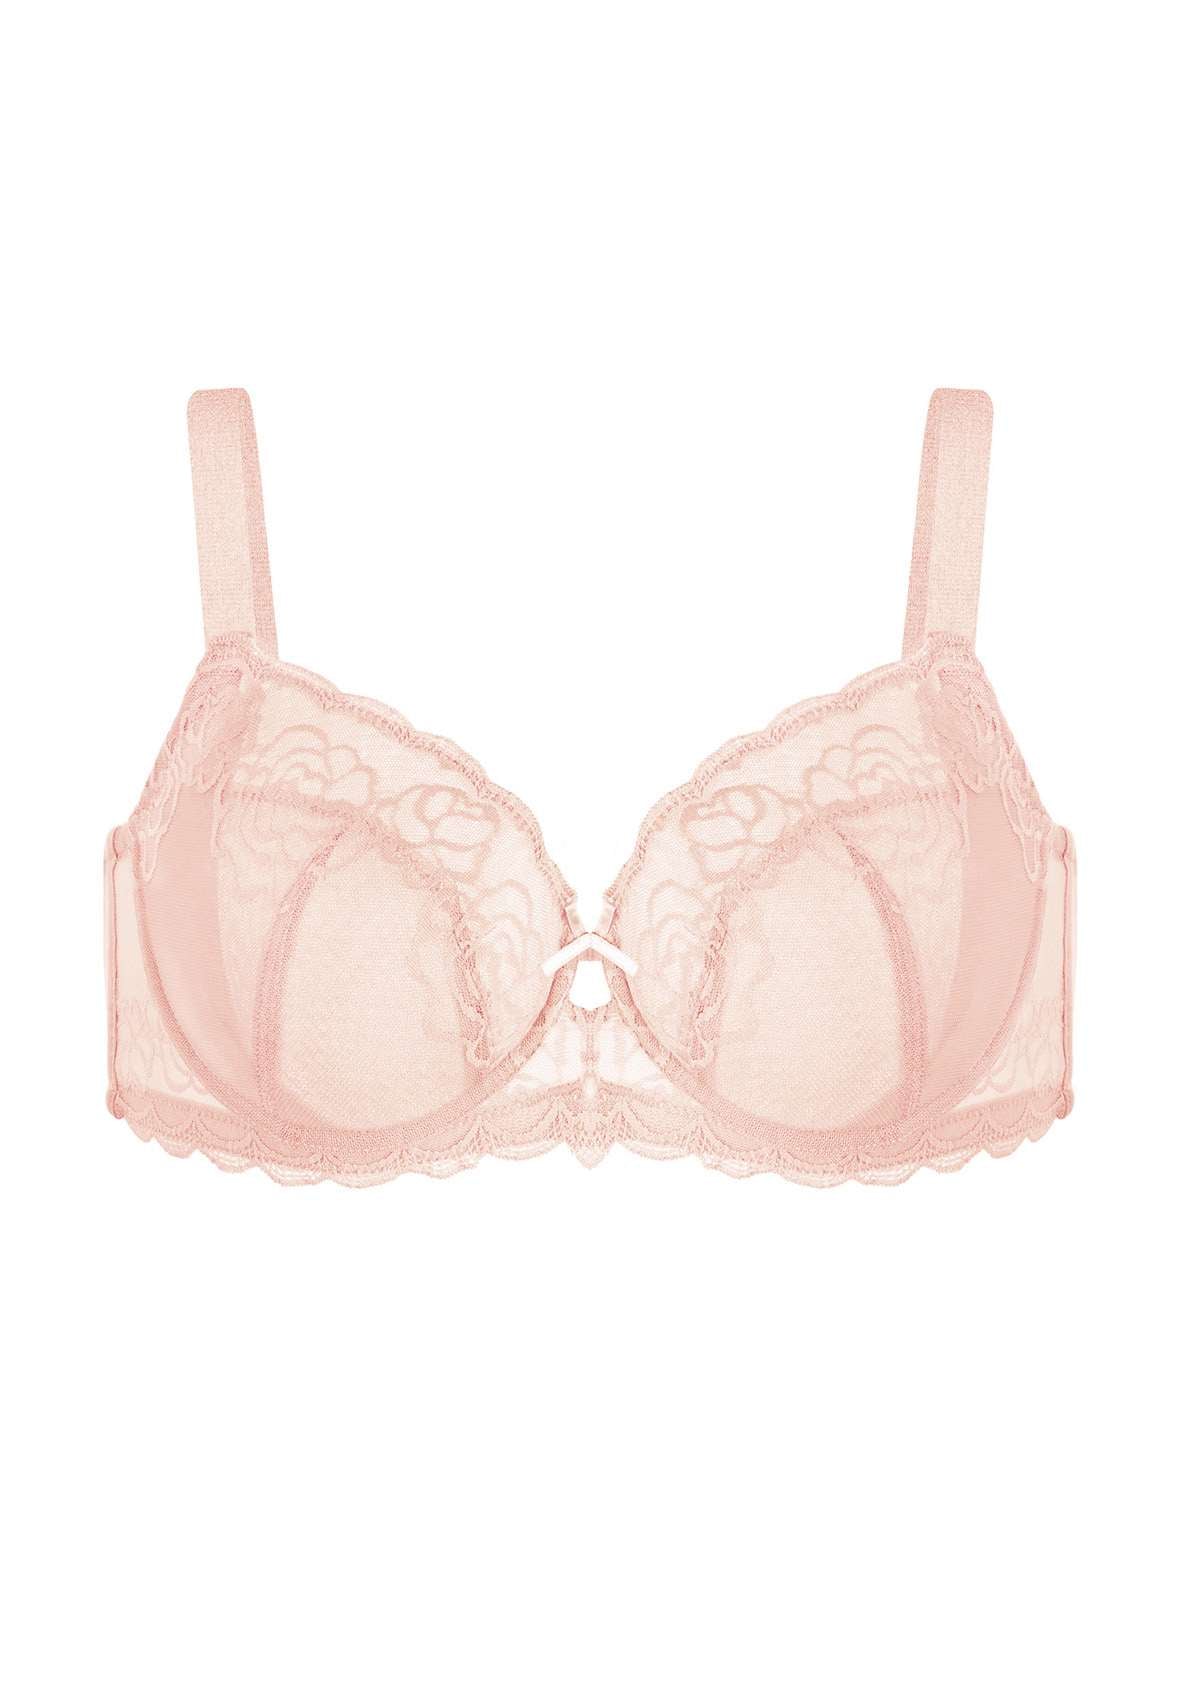 HSIA Rosa Bonica Sheer Lace Mesh Unlined Thin Comfy Woman Bra - Pink / 40 / C